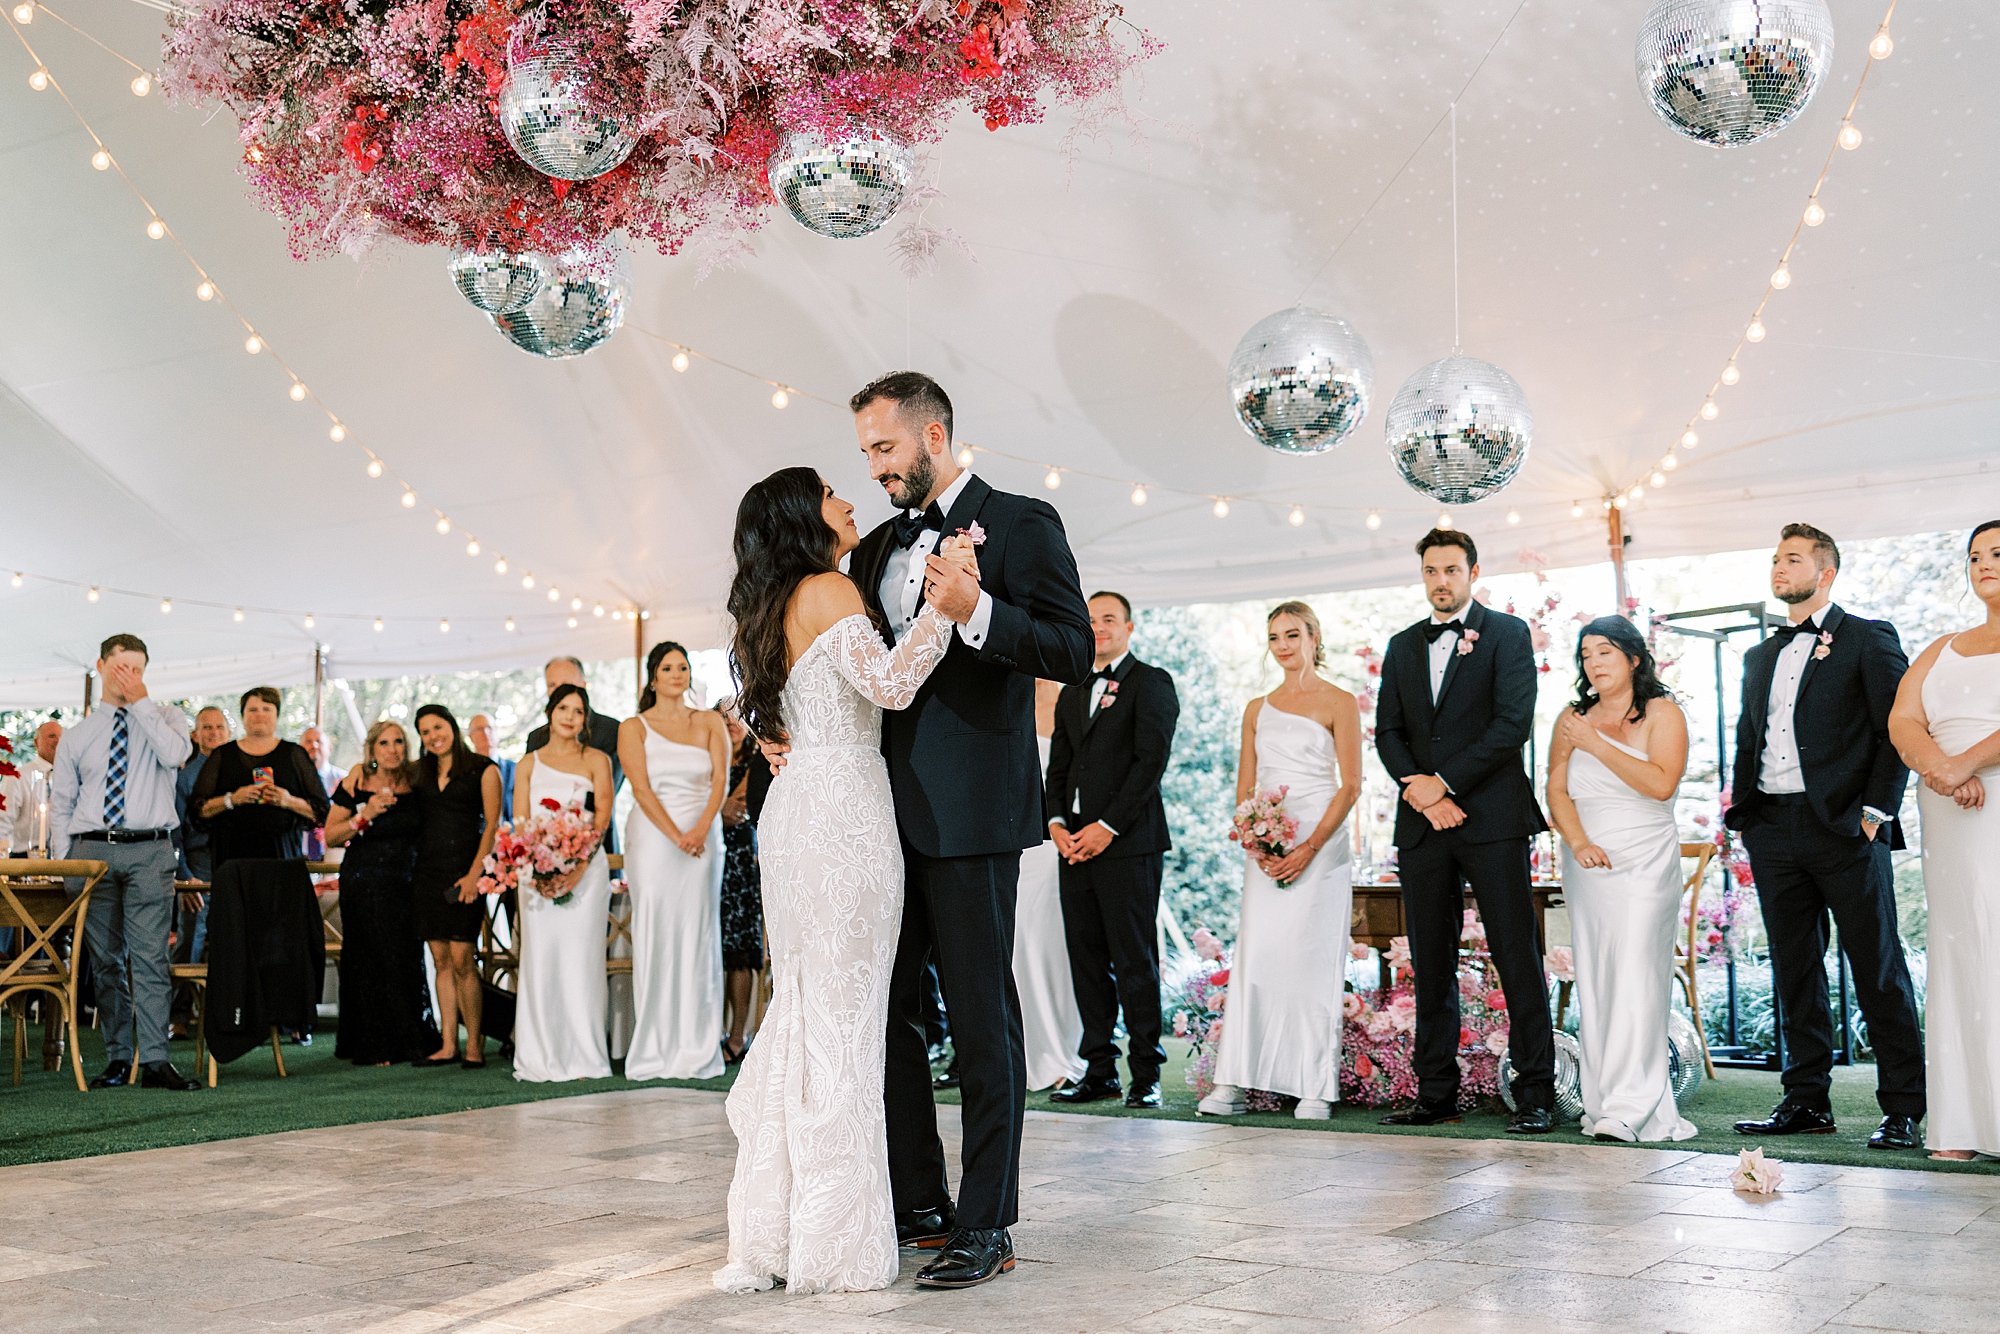 bride and groom have first dance on dance floor with monochromatic pink floral display and disco balls hanging from tent